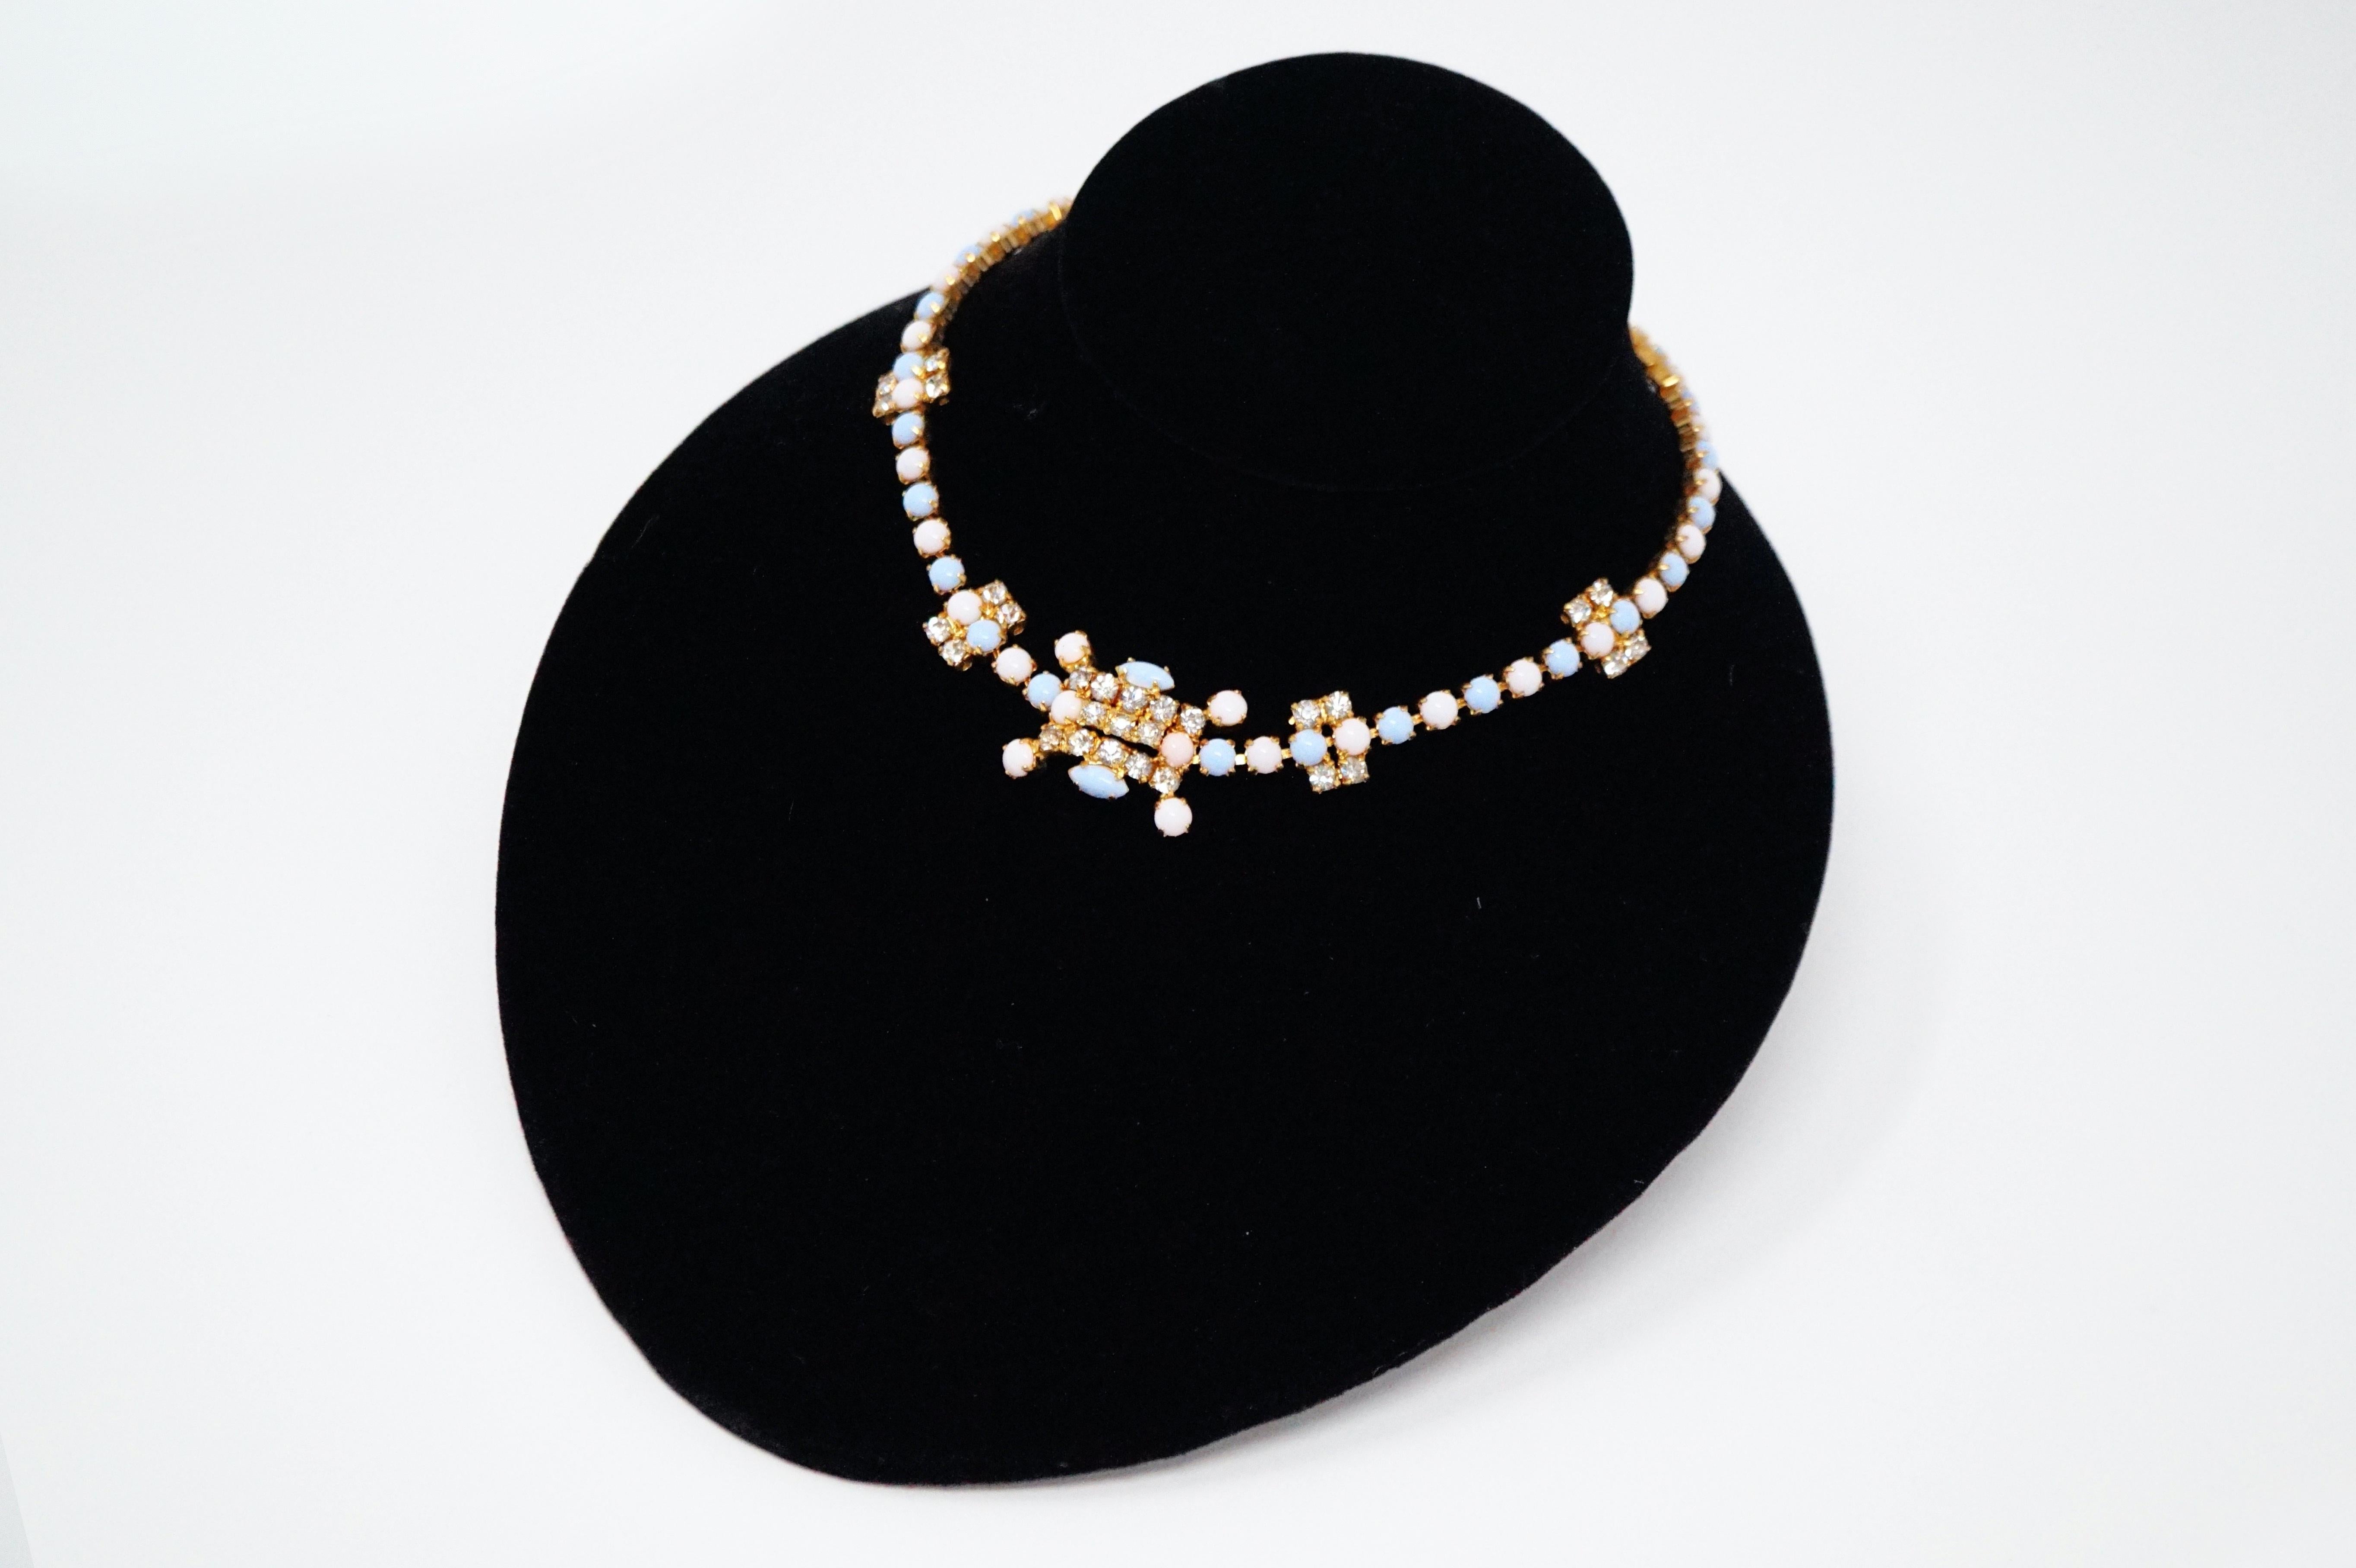 Vintage Periwinkle & White Milk Glass and Rhinestone Necklace, circa 1960s 10